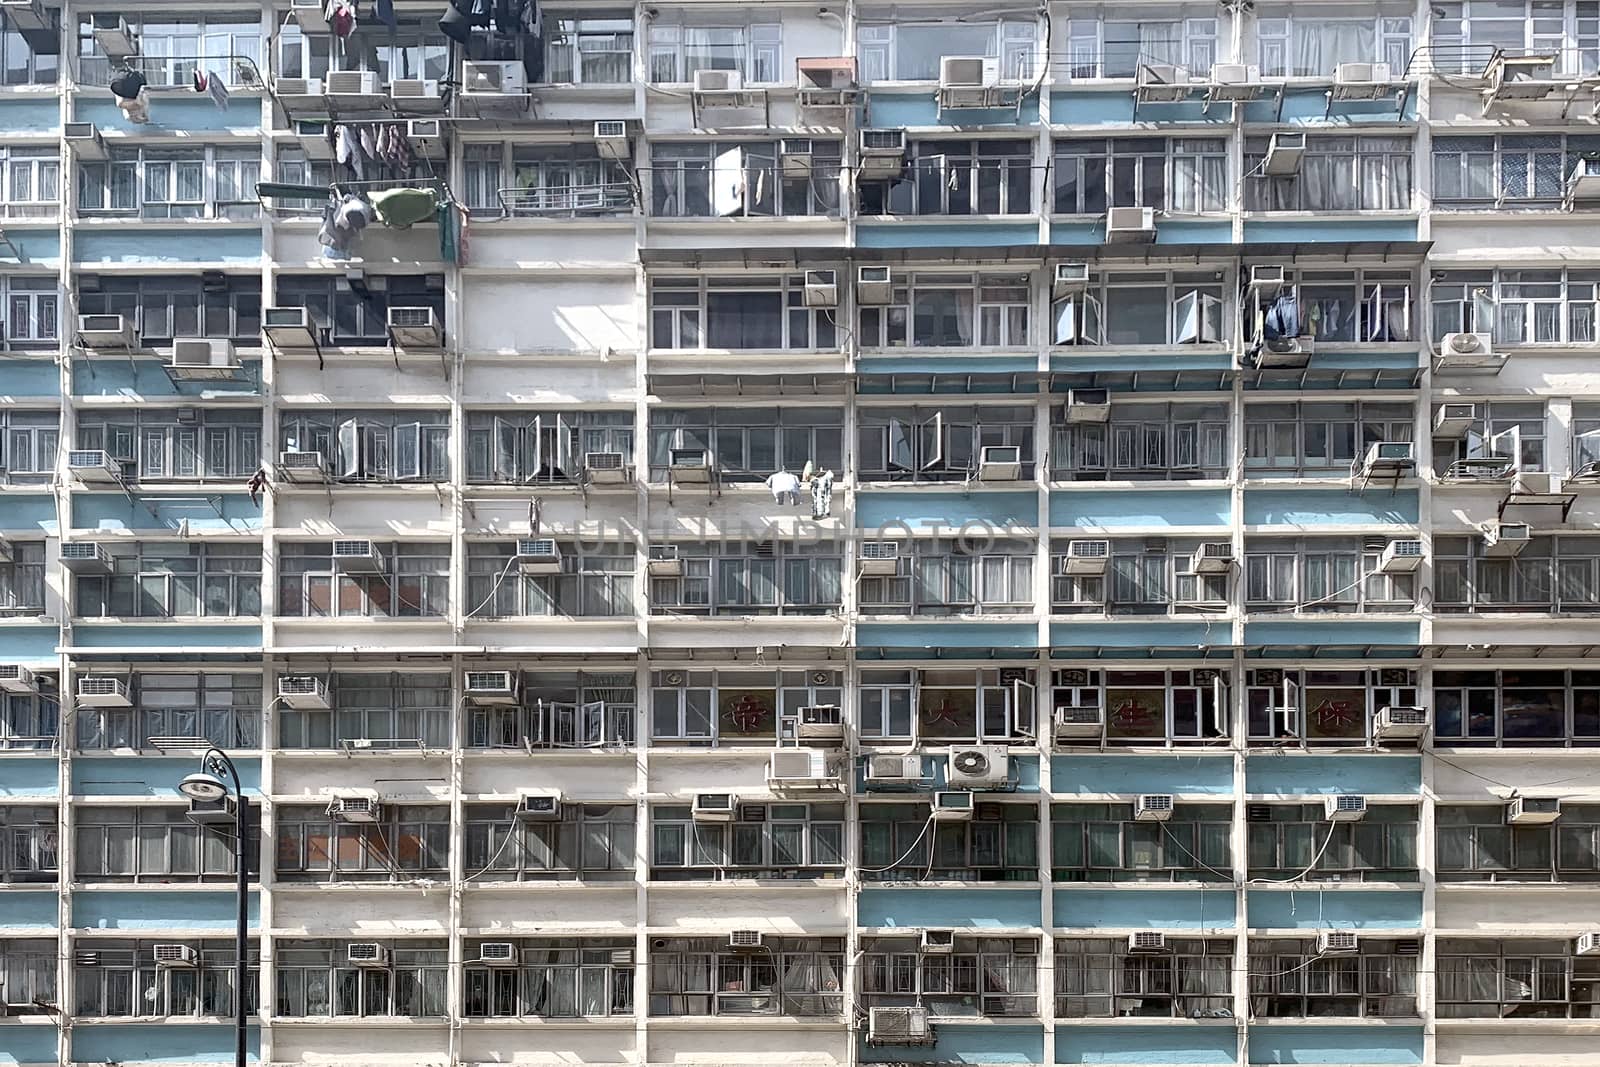 The crowded housing apartment in Hong Kong residential estate  by cougarsan